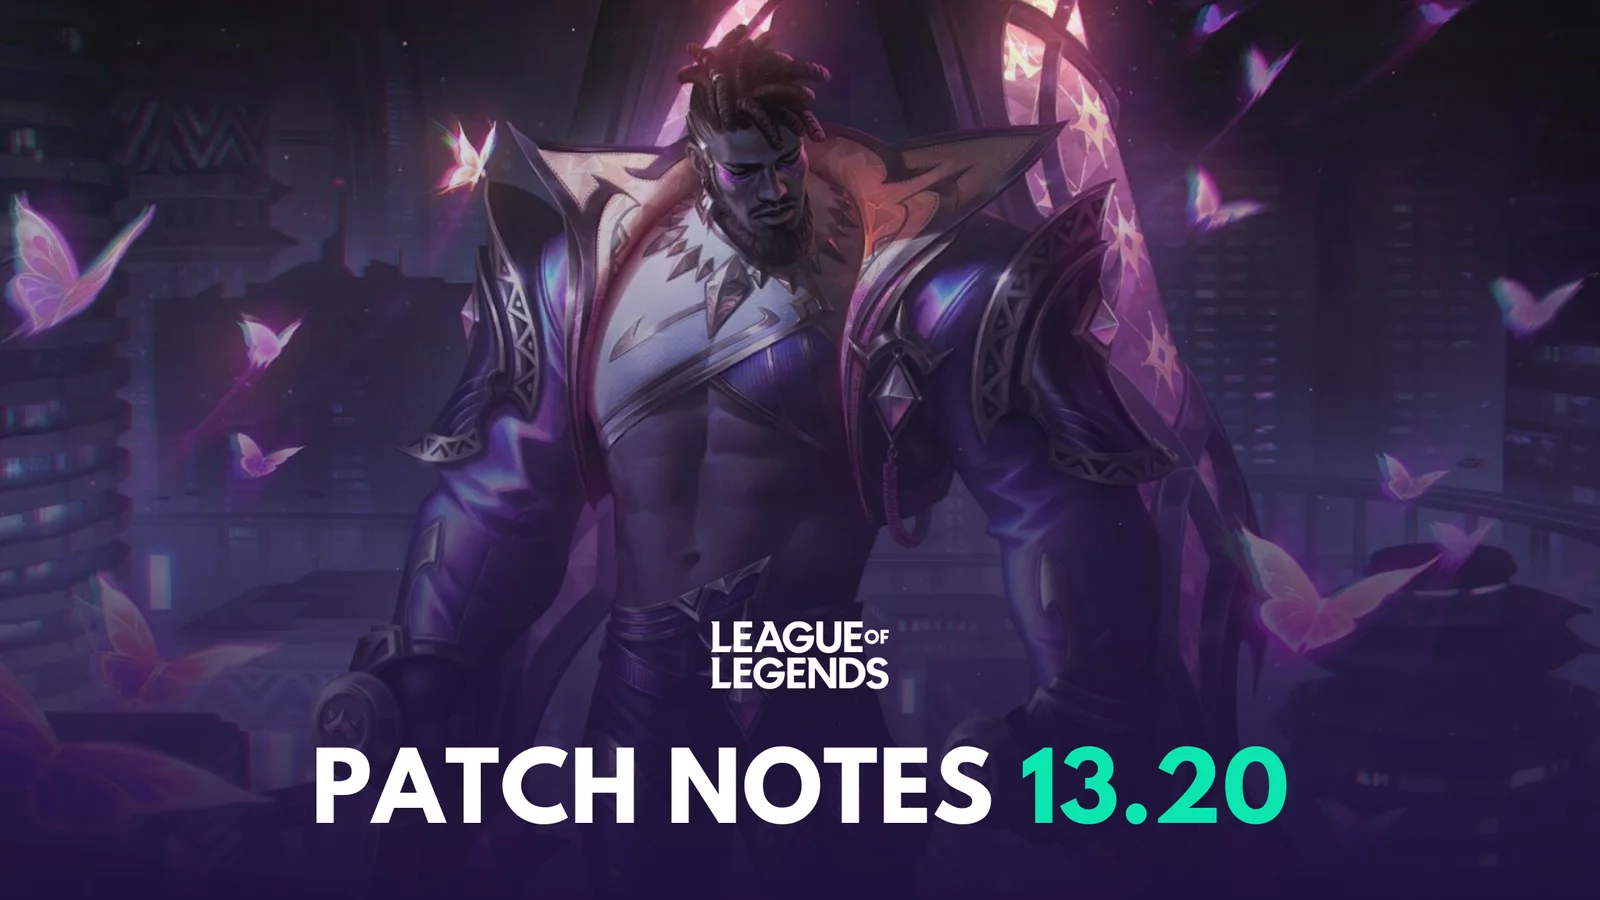 Patch Notes 13.20 of League of Legends: Impactful Changes to K’Sante and Smite